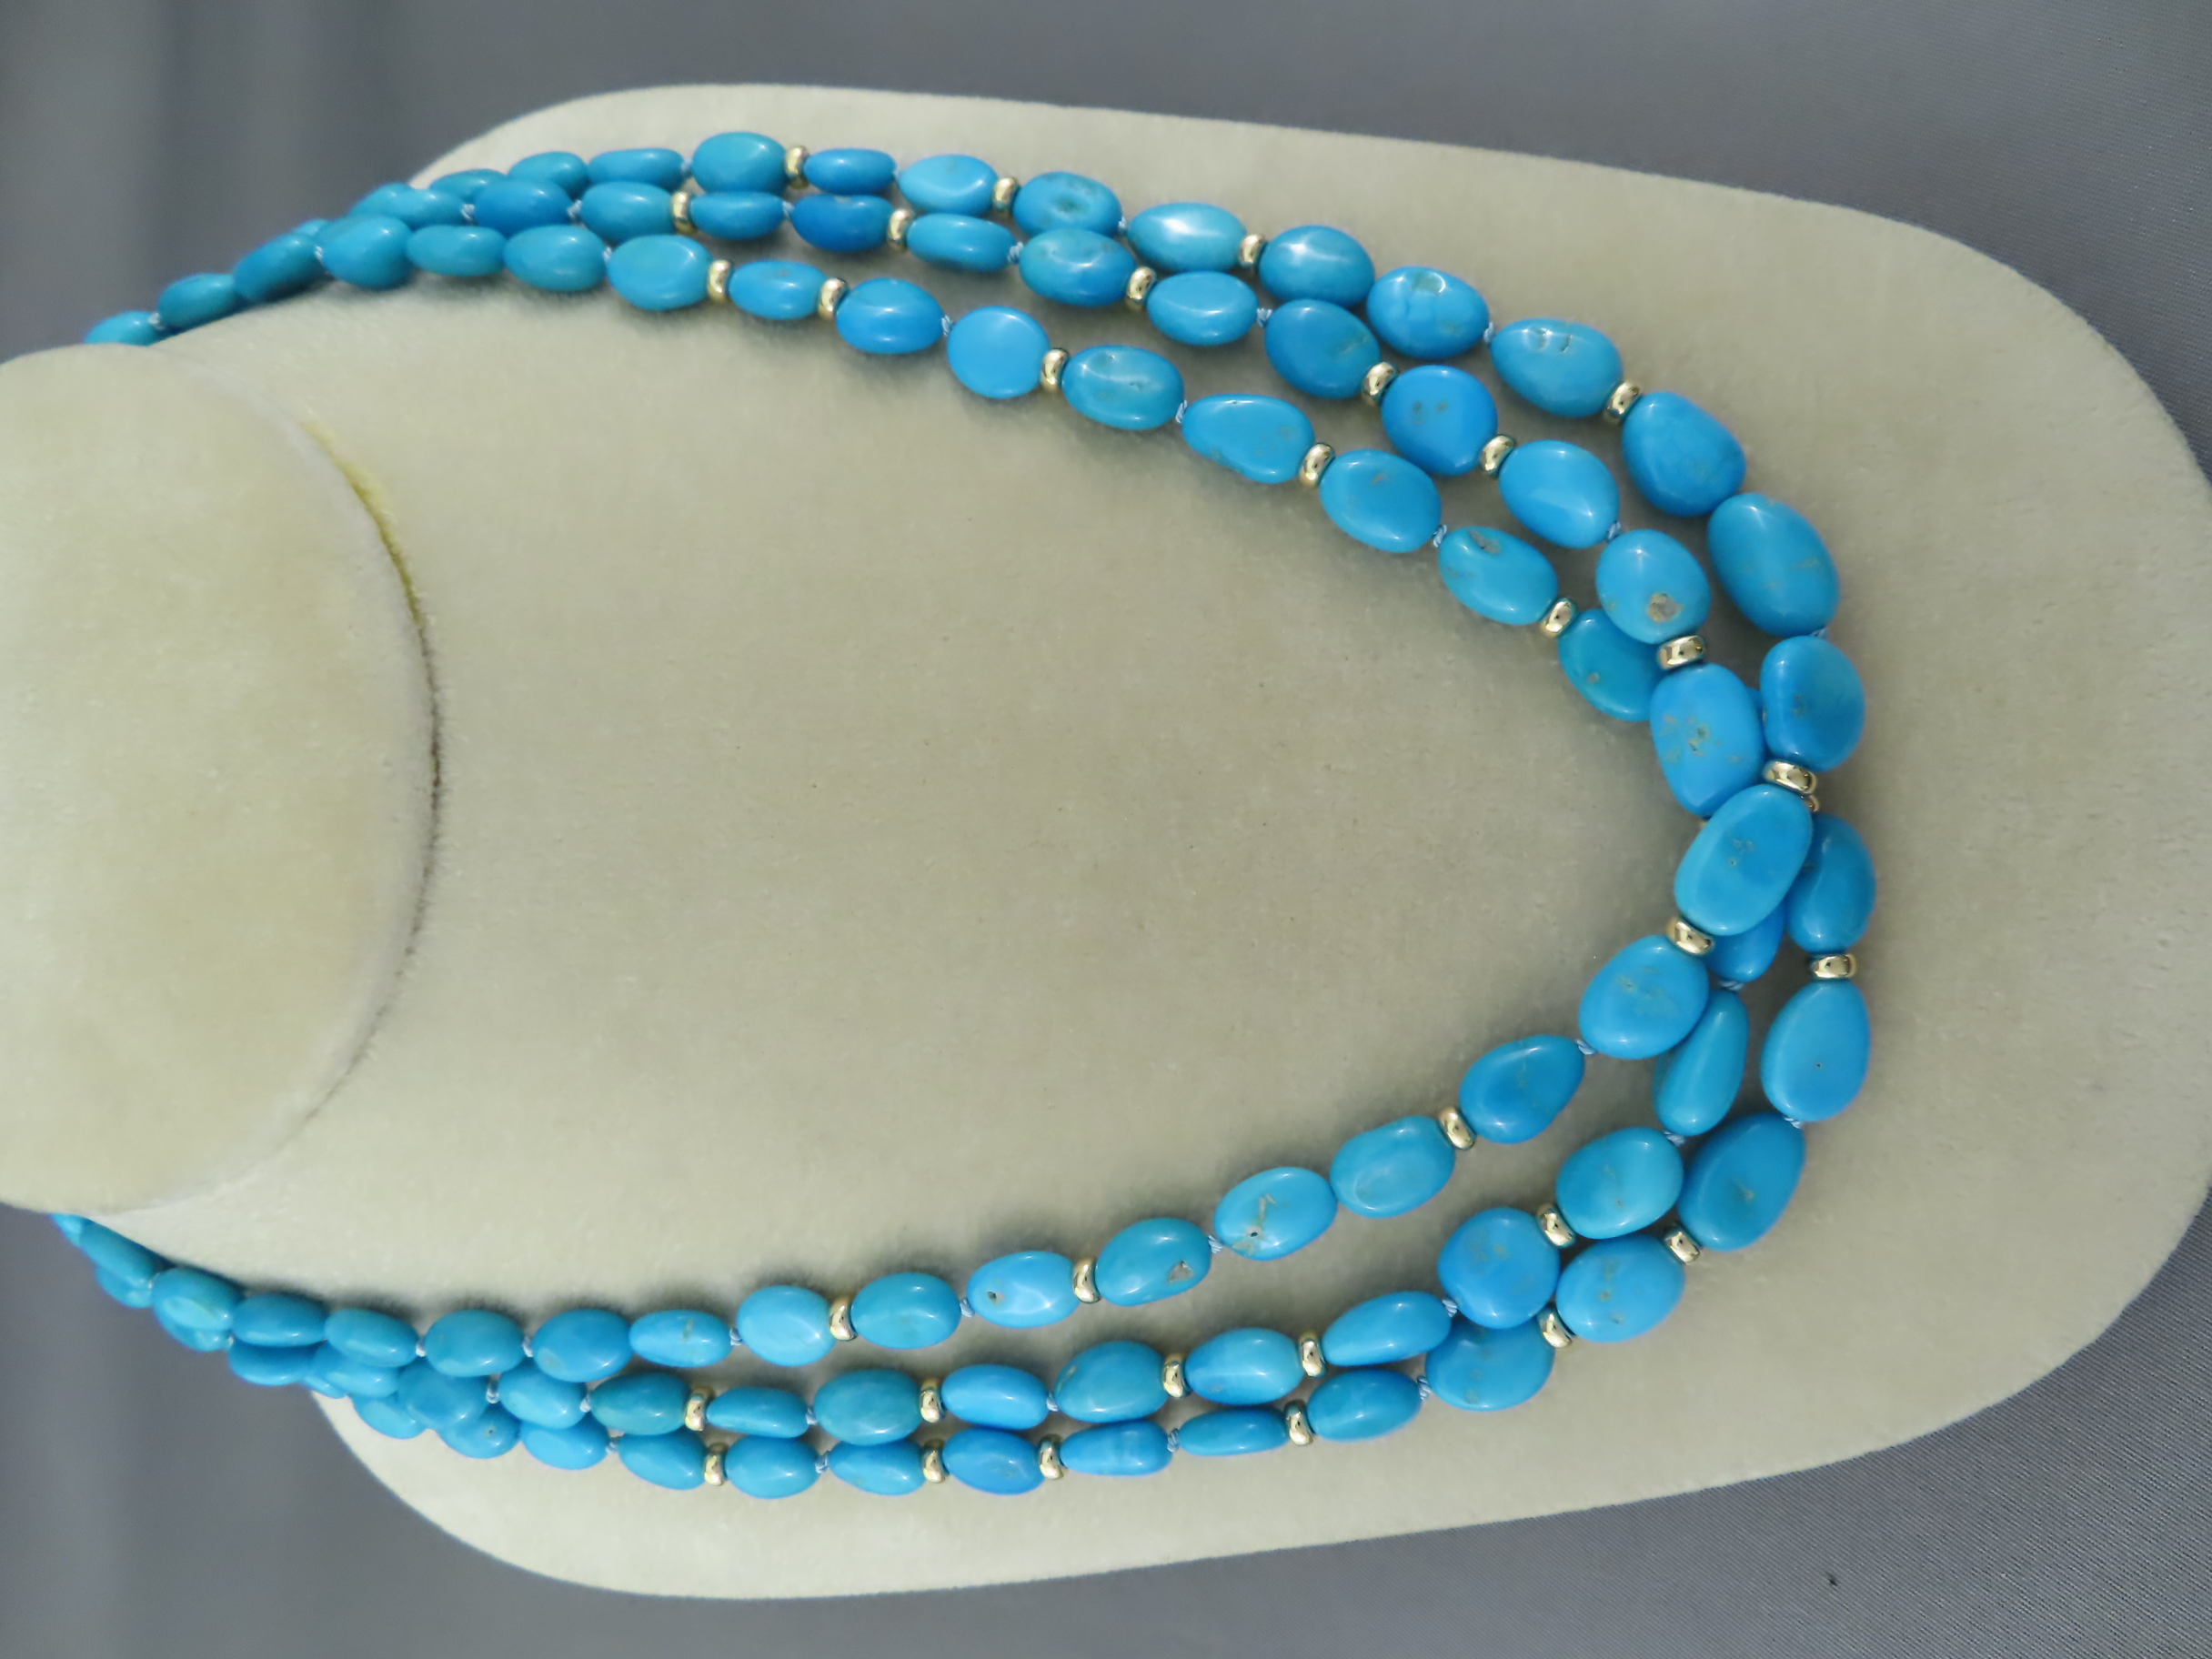 Shop Turquoise & Gold Jewelry - 3-Strand Sleeping Beauty Turquoise & Gold Necklace by Native American jewelers, Pilar Lovato & Curtis Pete FOR SALE $5,350-